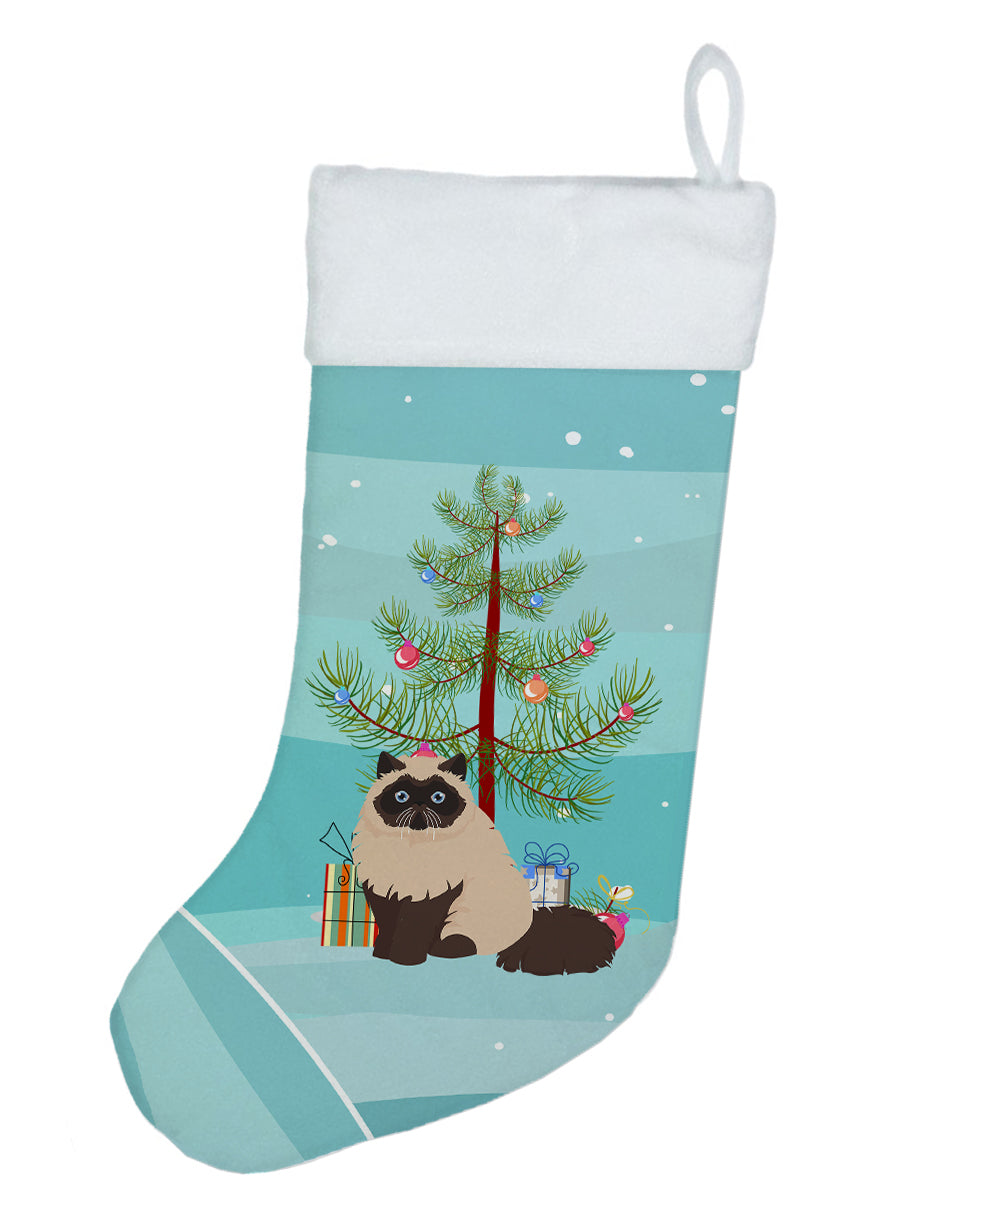 Colorpoint Persian Hymalayan Cat Merry Christmas Christmas Stocking